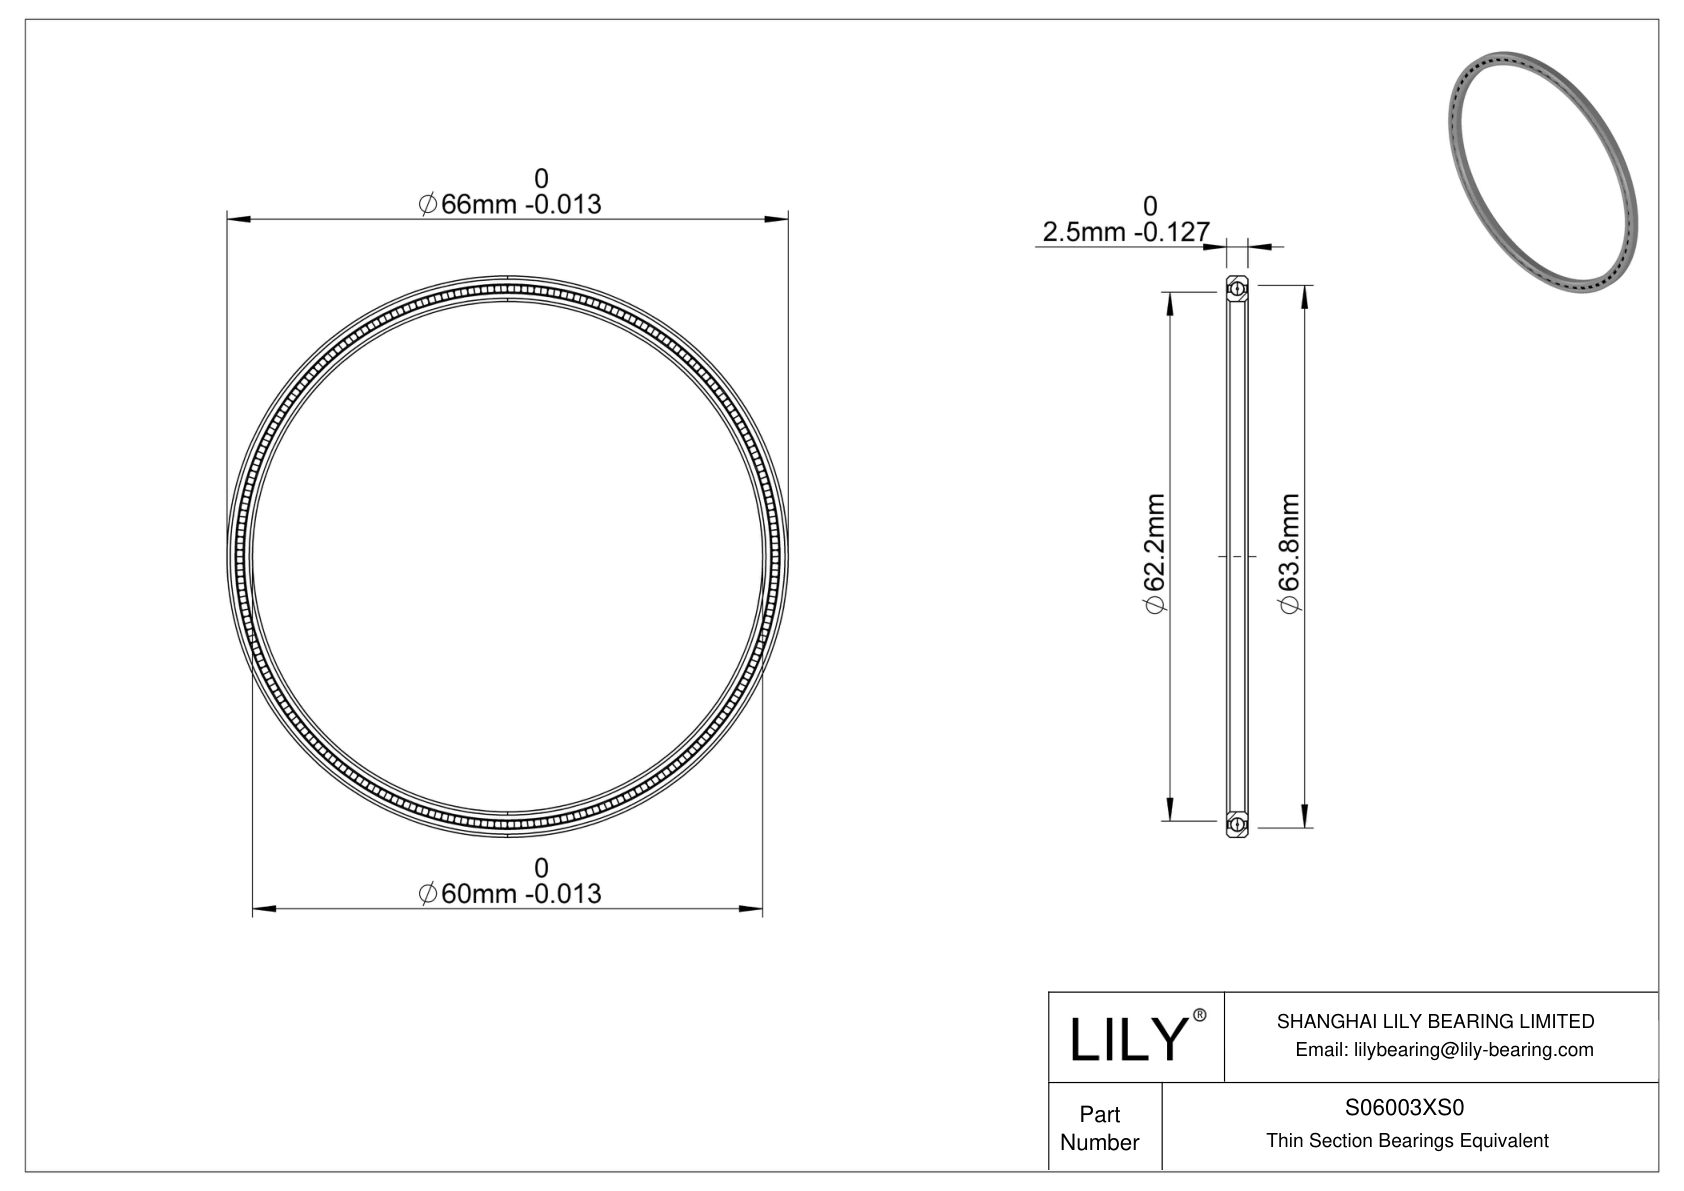 S06003XS0 Constant Section (CS) Bearings cad drawing